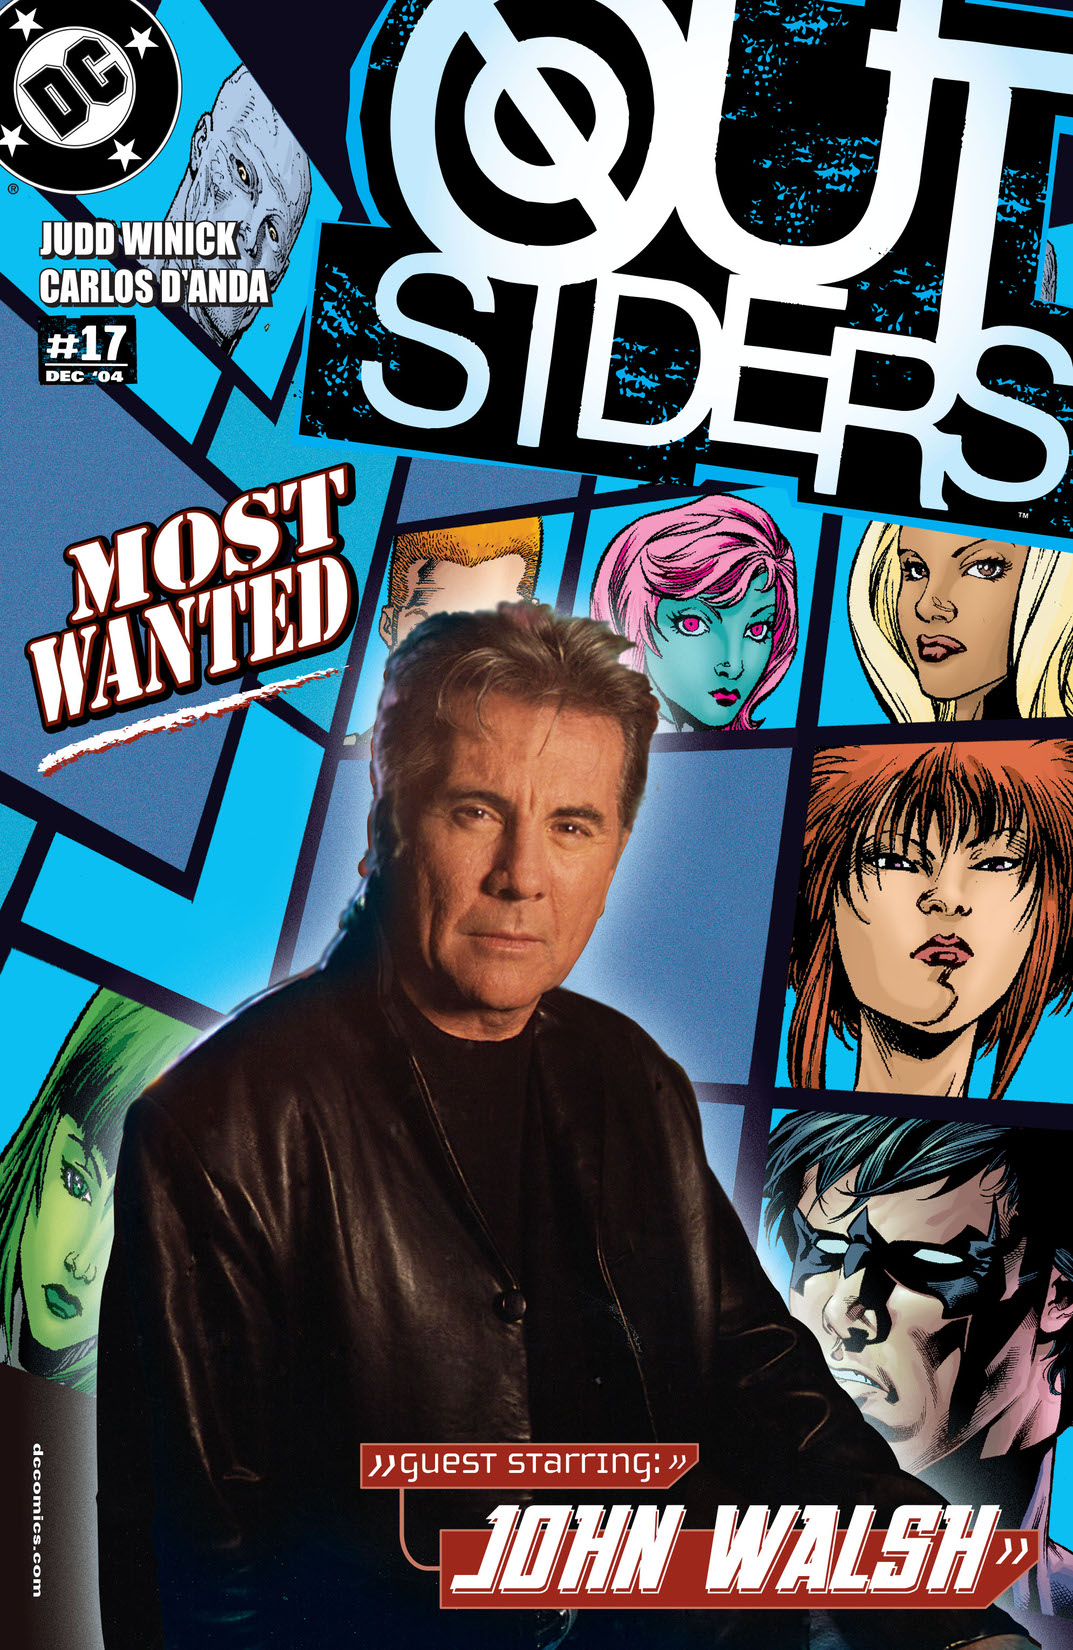 Outsiders (2003-) #17 preview images